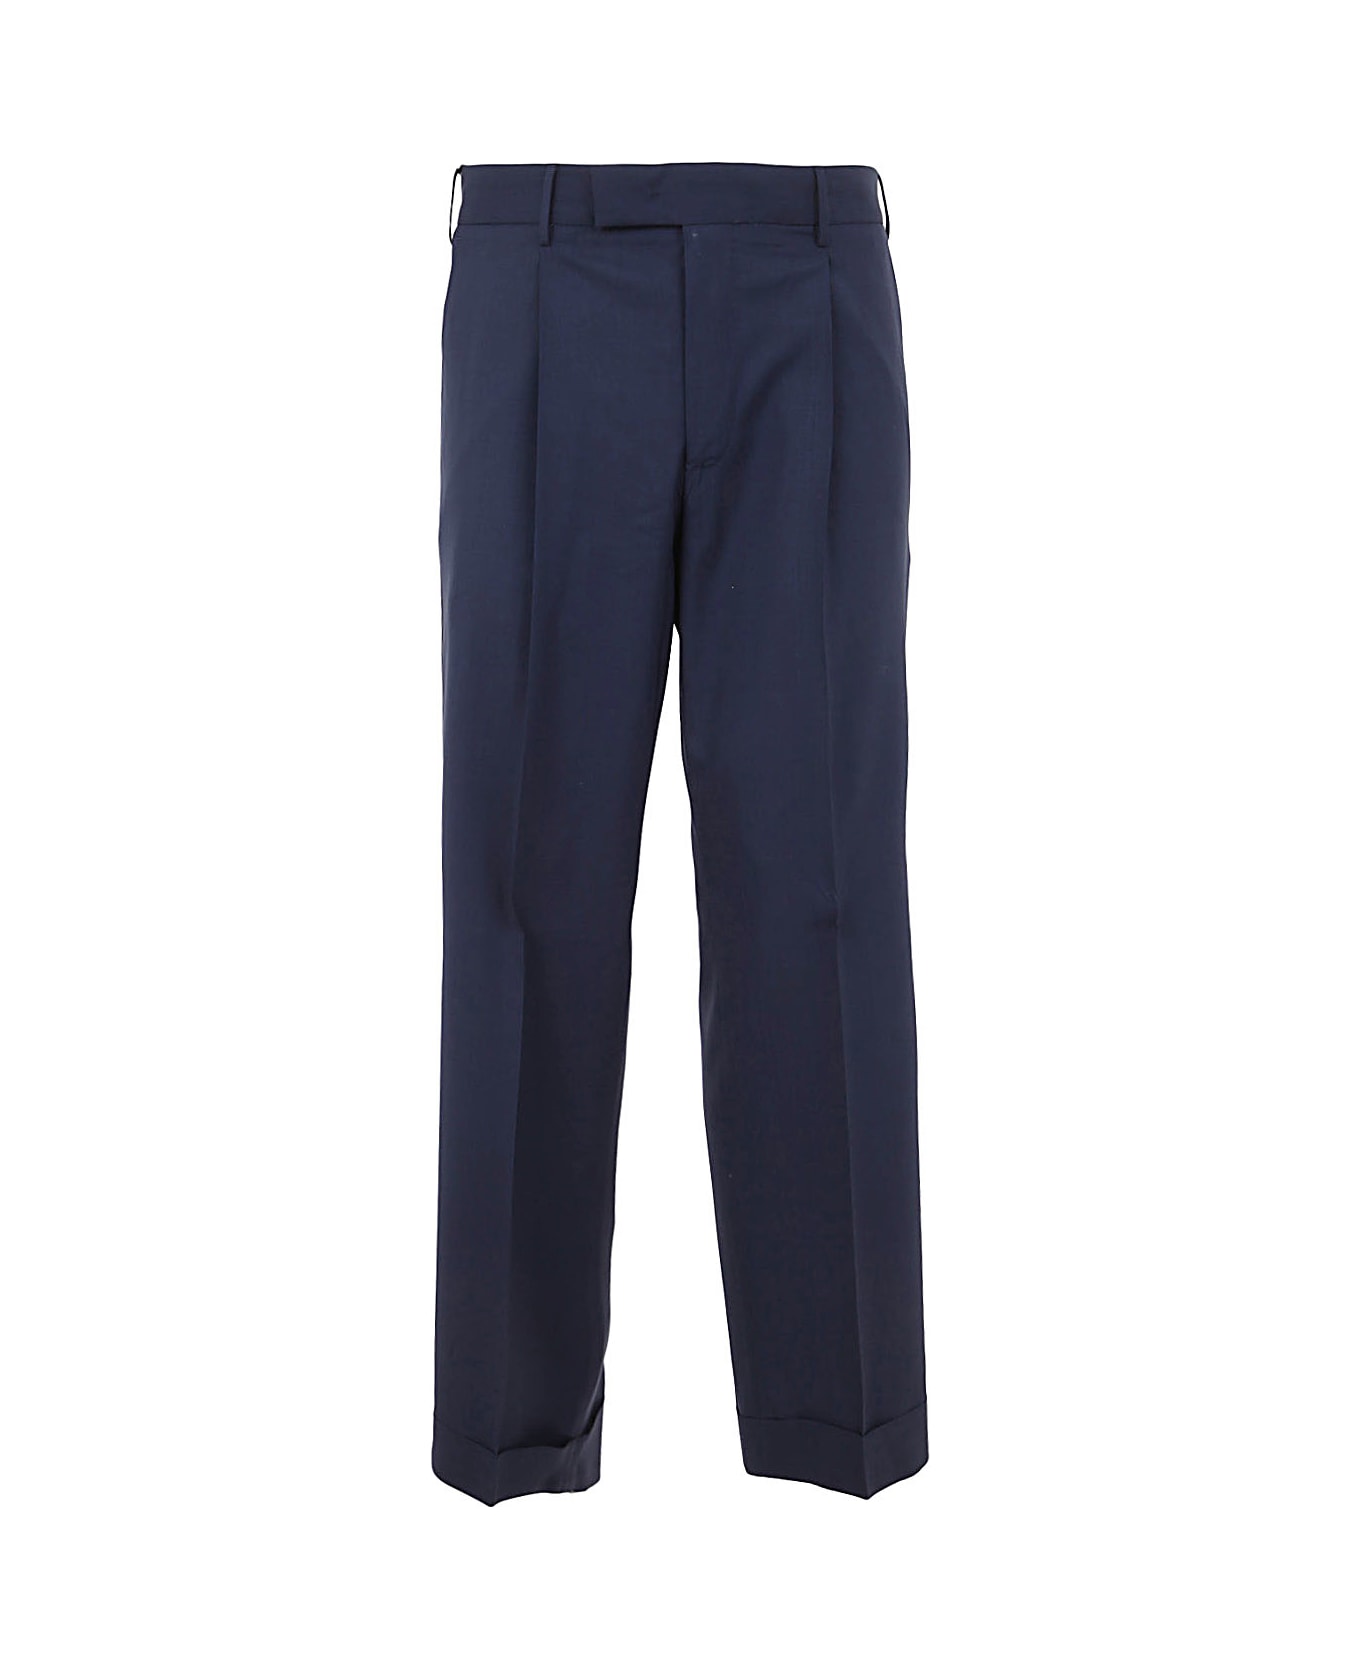 PT Torino Man Trousers With Lapel And Pences - Navy Blue